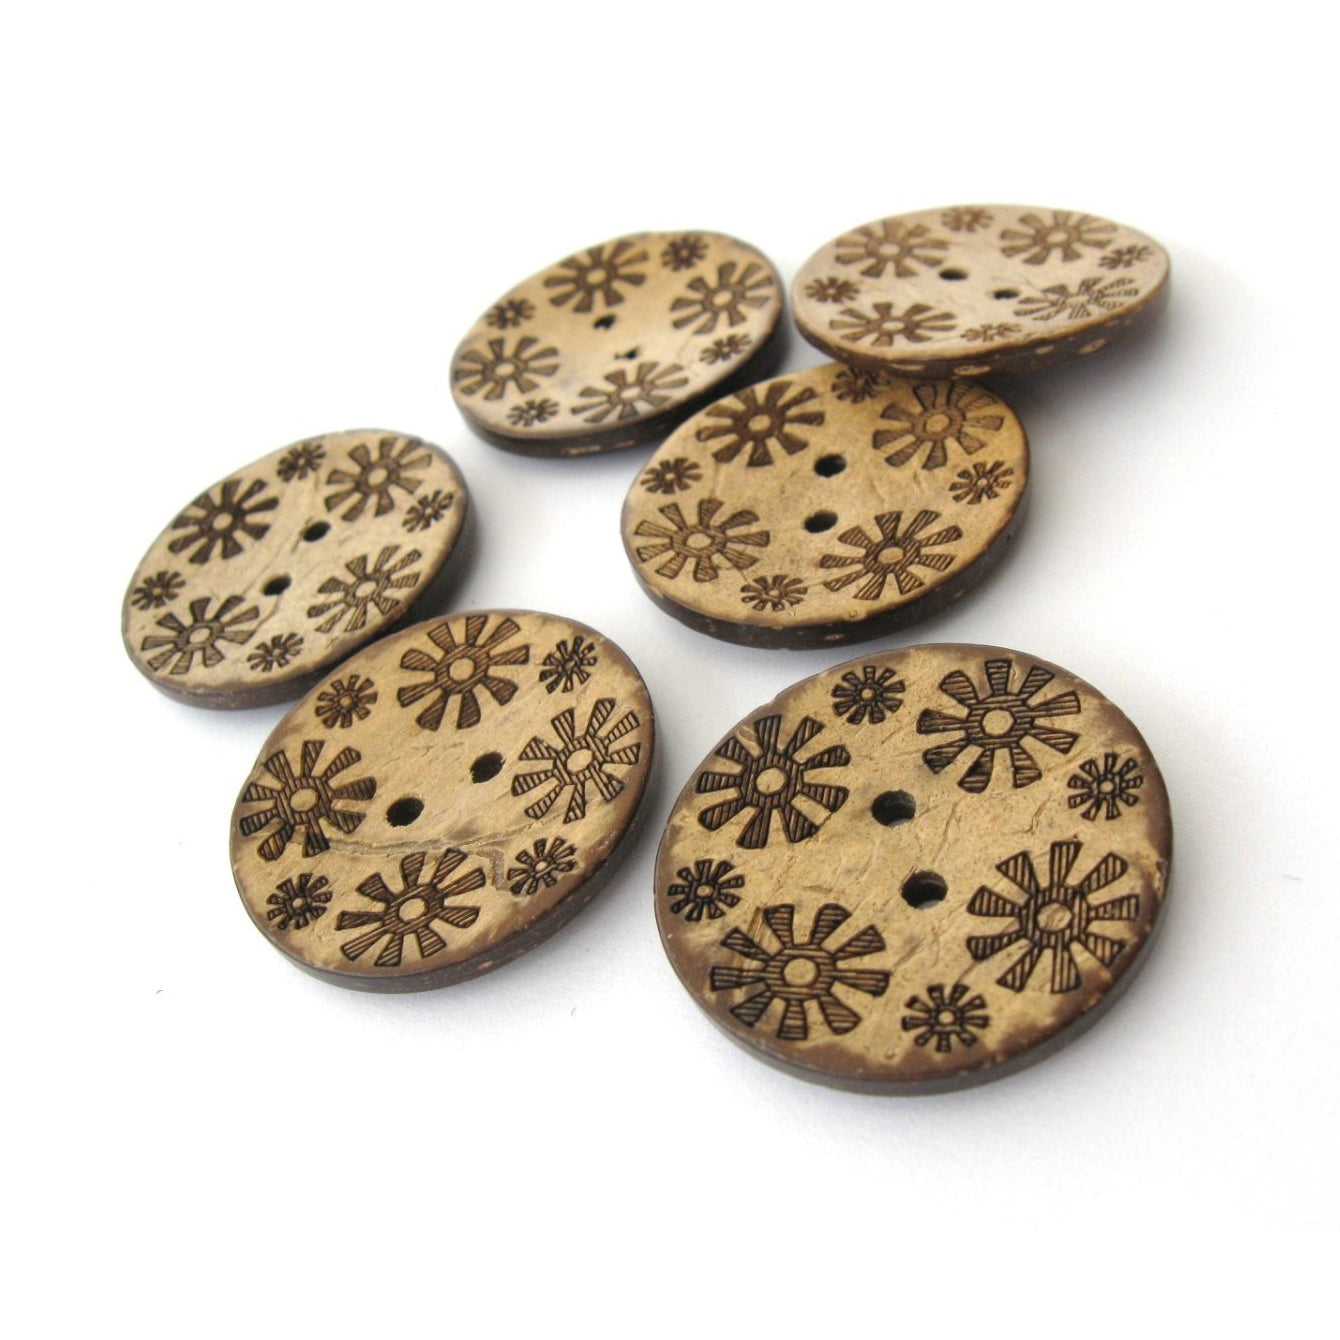 Best Deal for 25MM Dark Brown Flat Coconut Shell Buttons 40L 1 inch Knit